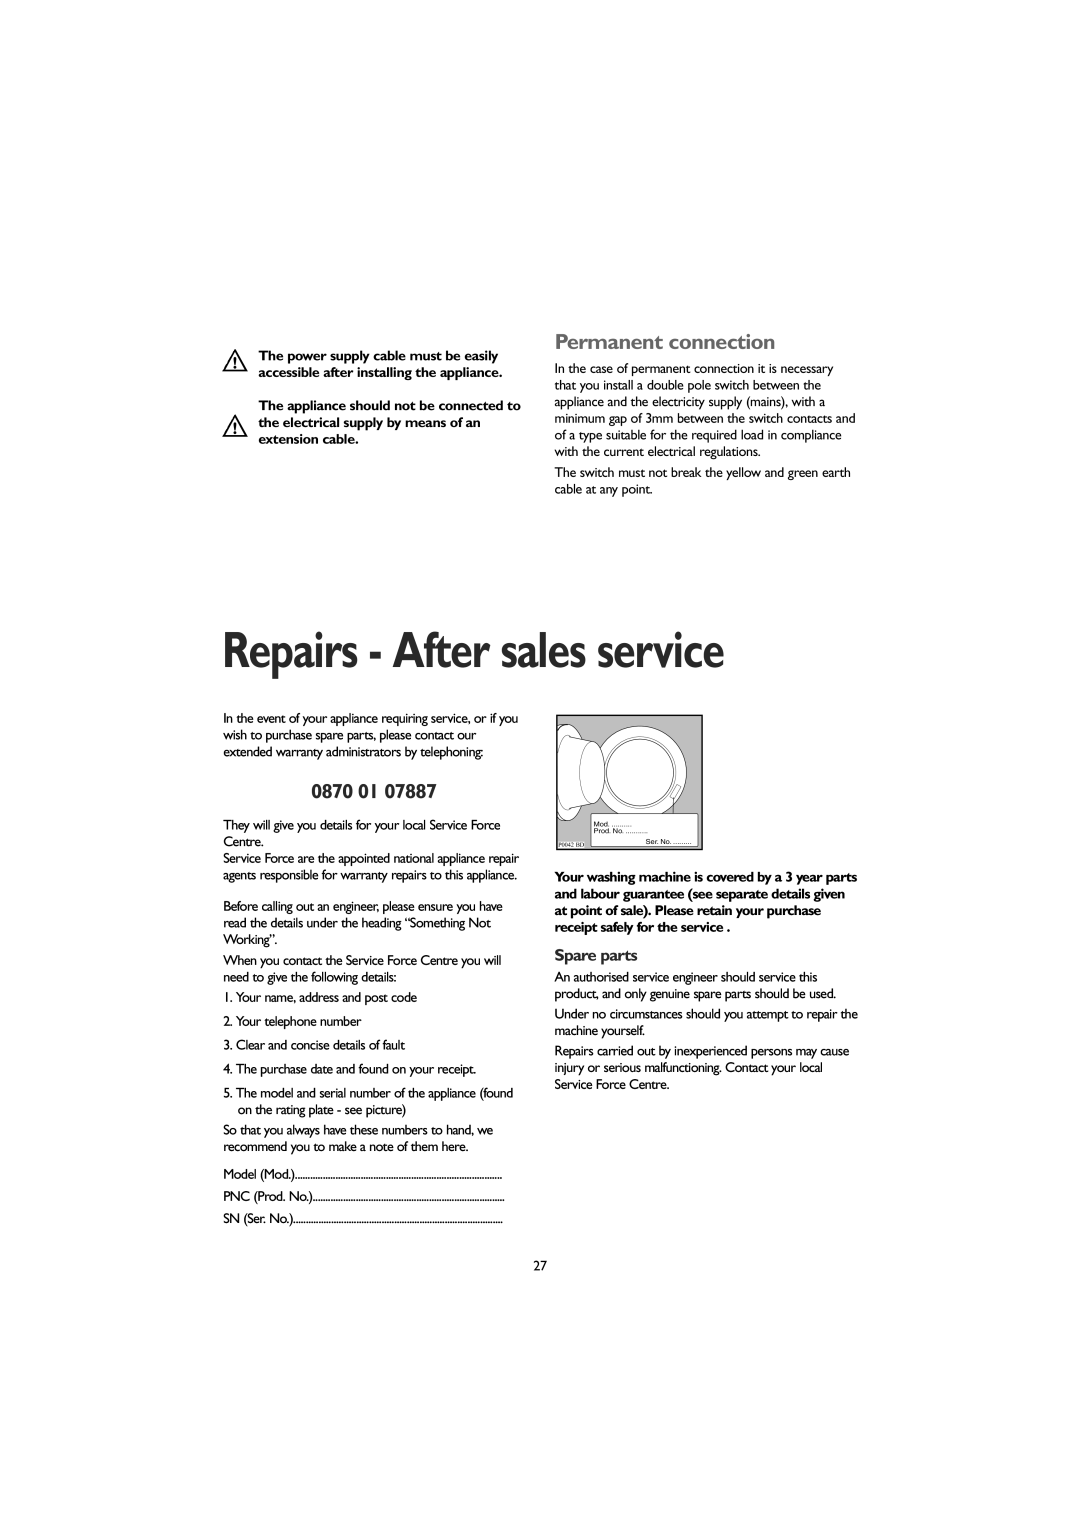 John Lewis JLWM 1406 instruction manual Permanent connection, 0870 01, Spare parts, Repairs - After sales service 